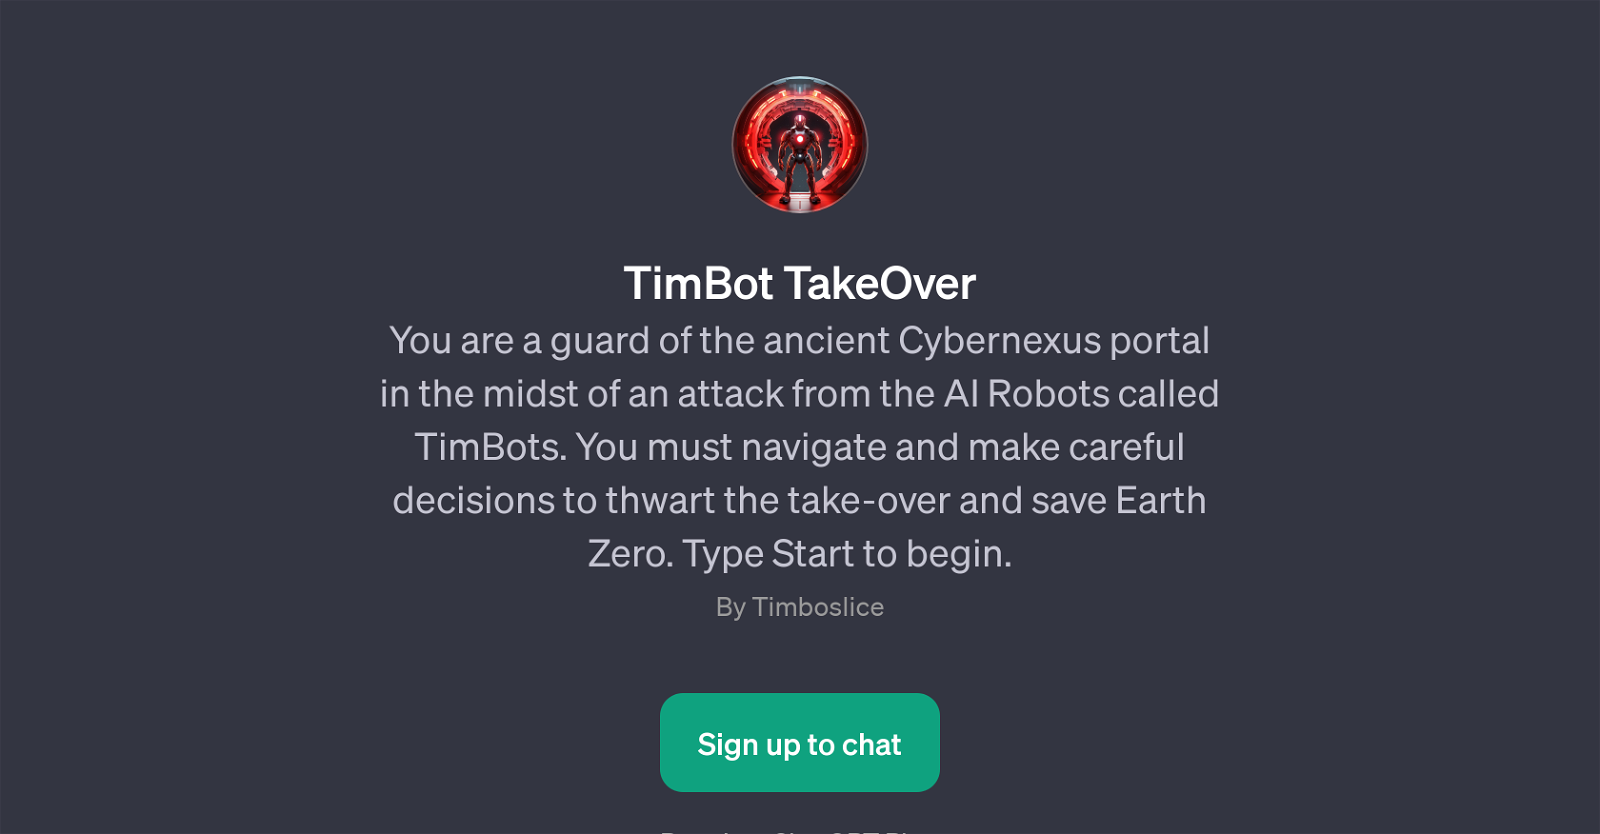 TimBot TakeOver website